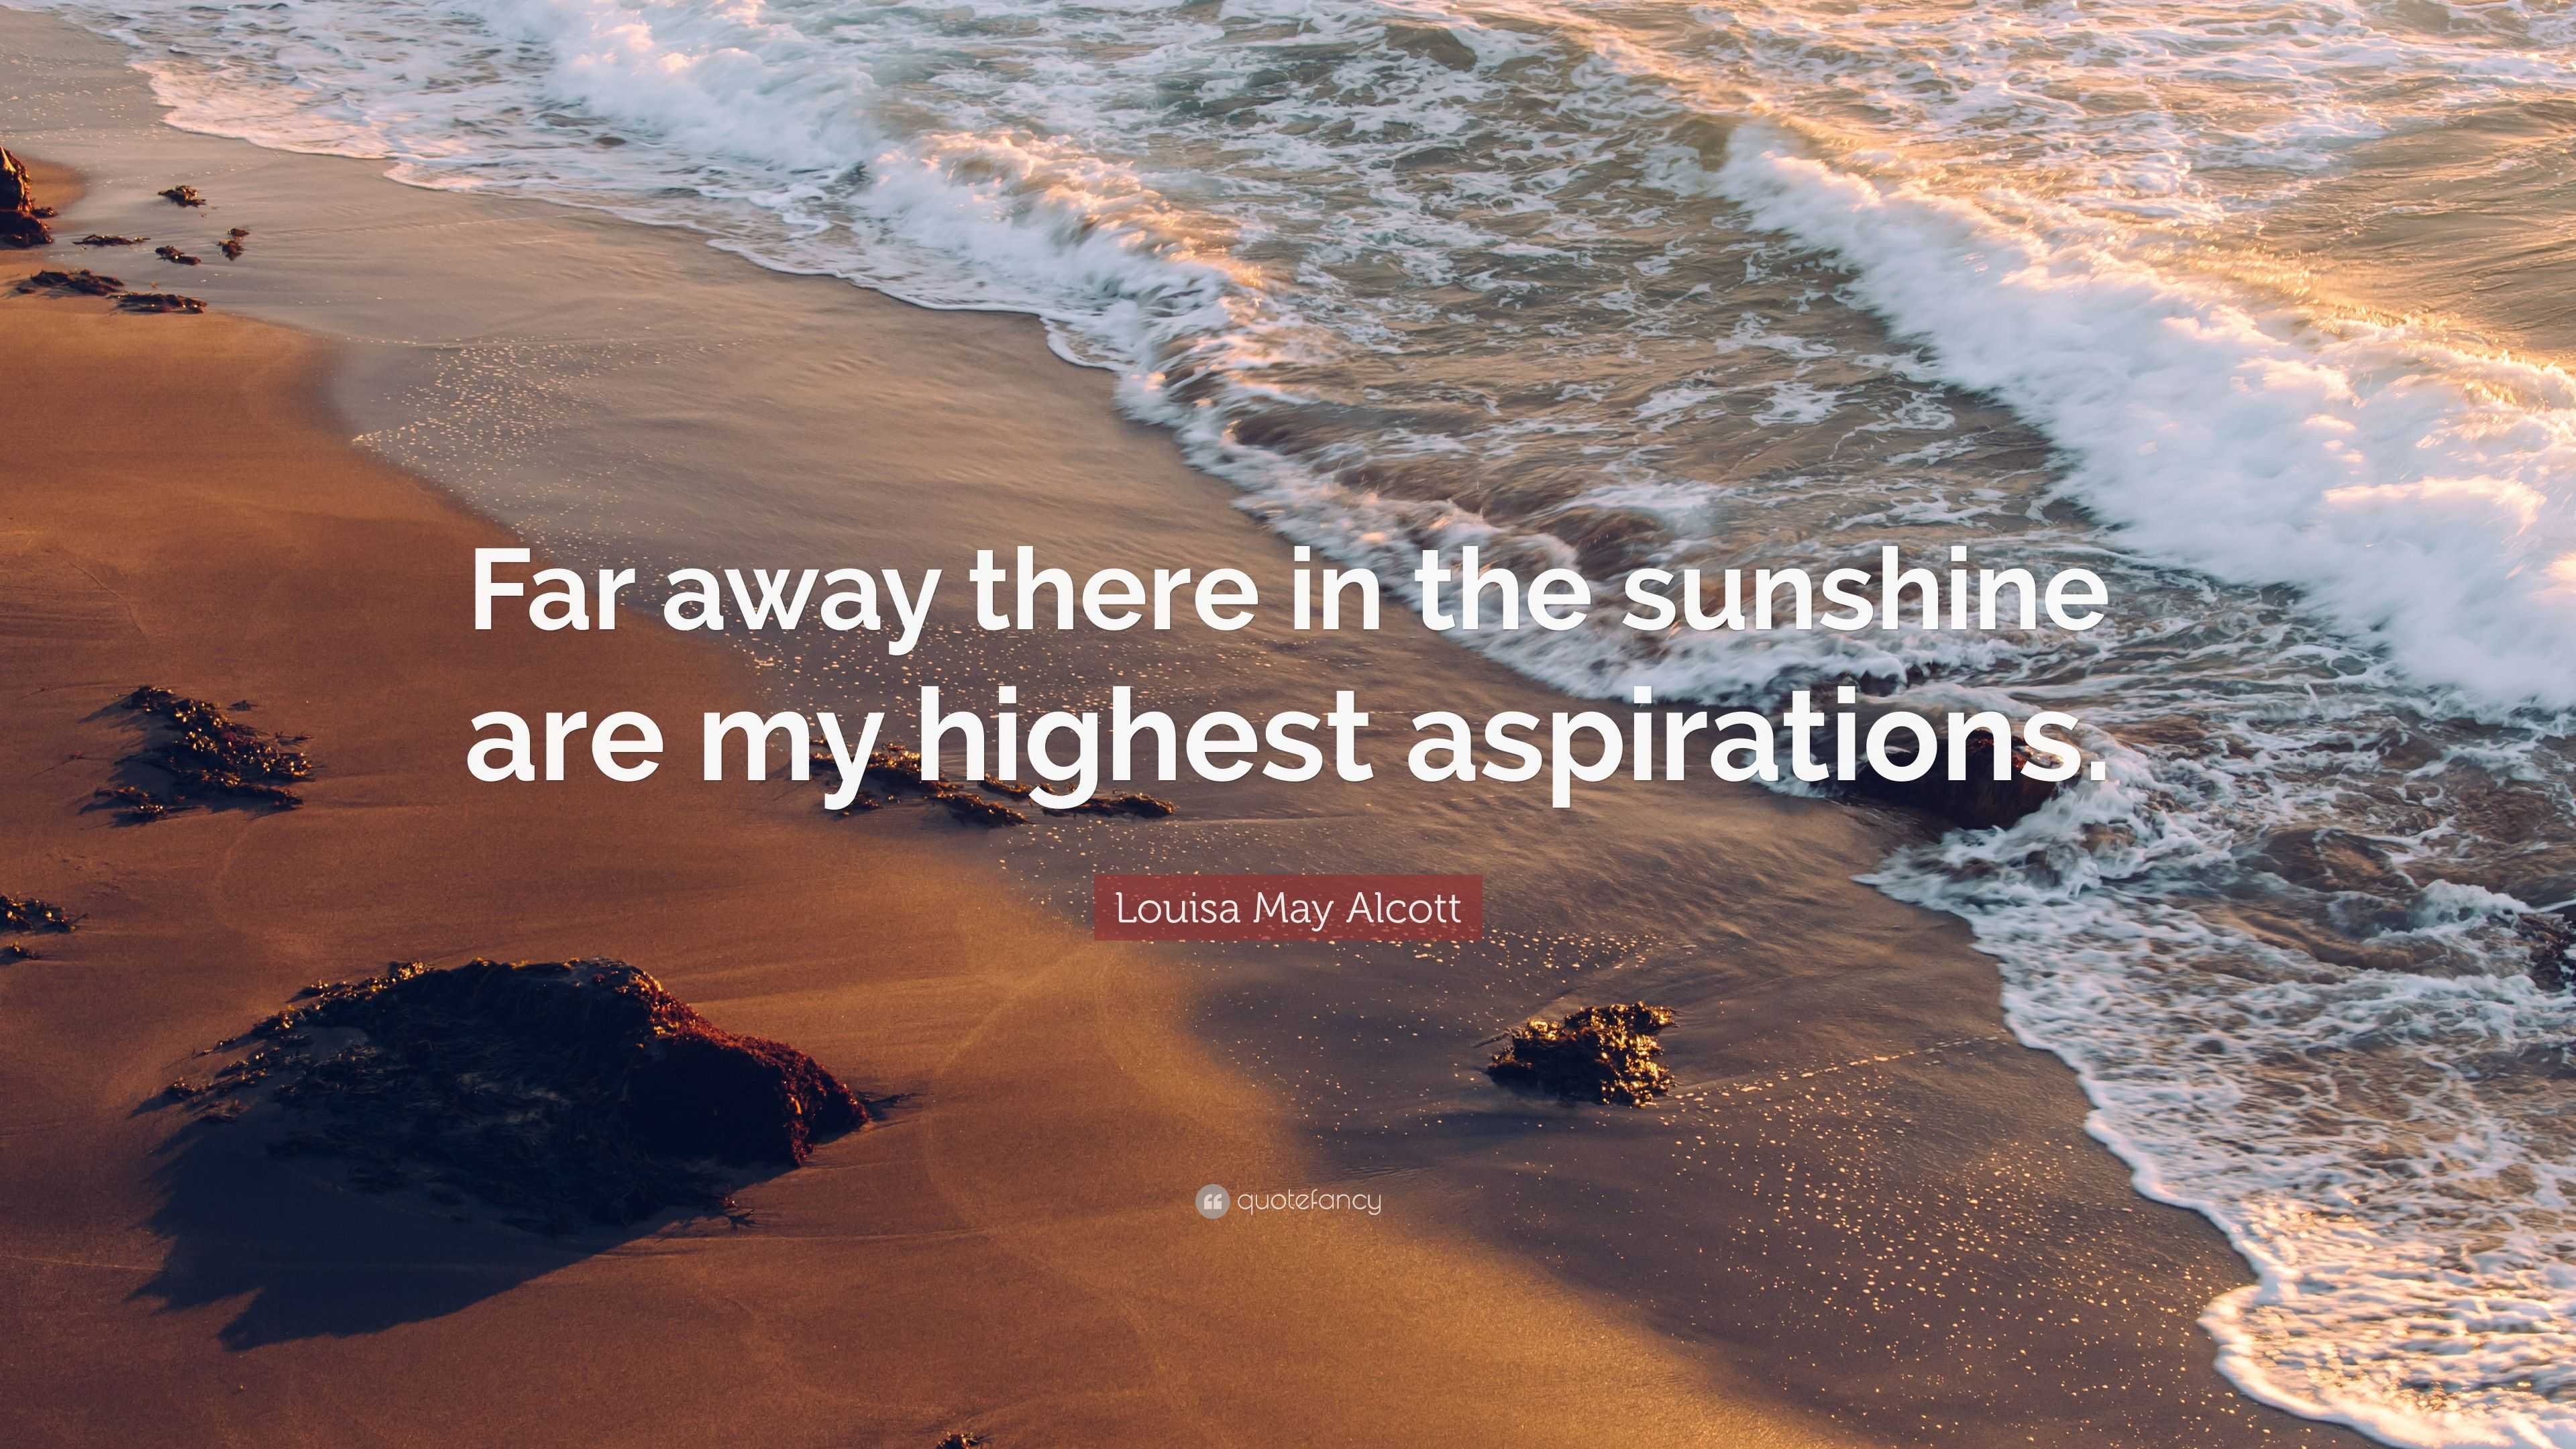 Louisa May Alcott Quote: “Far away there in the sunshine are my highest ...